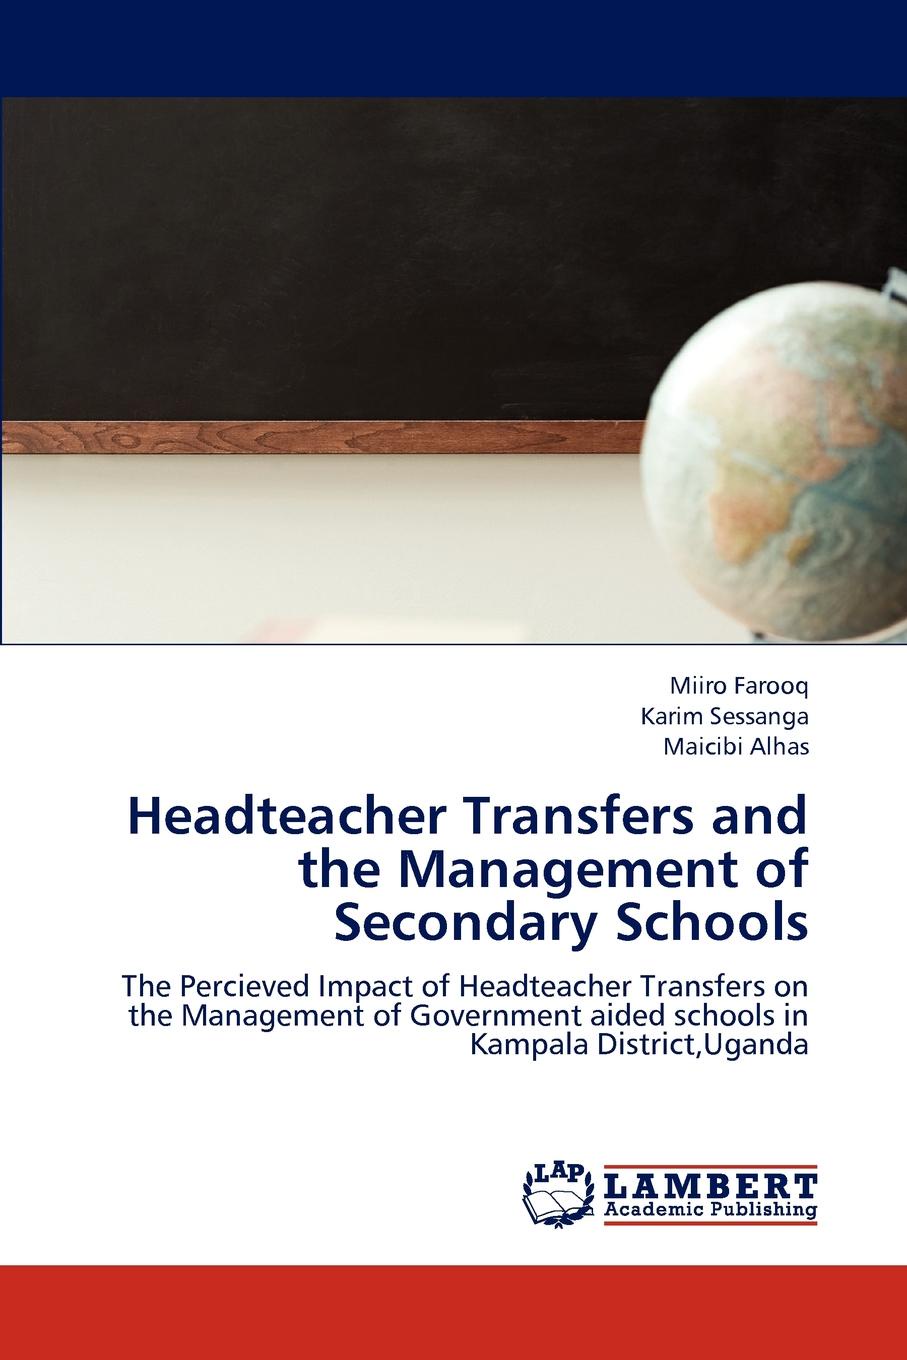 Headteacher Transfers and the Management of Secondary Schools